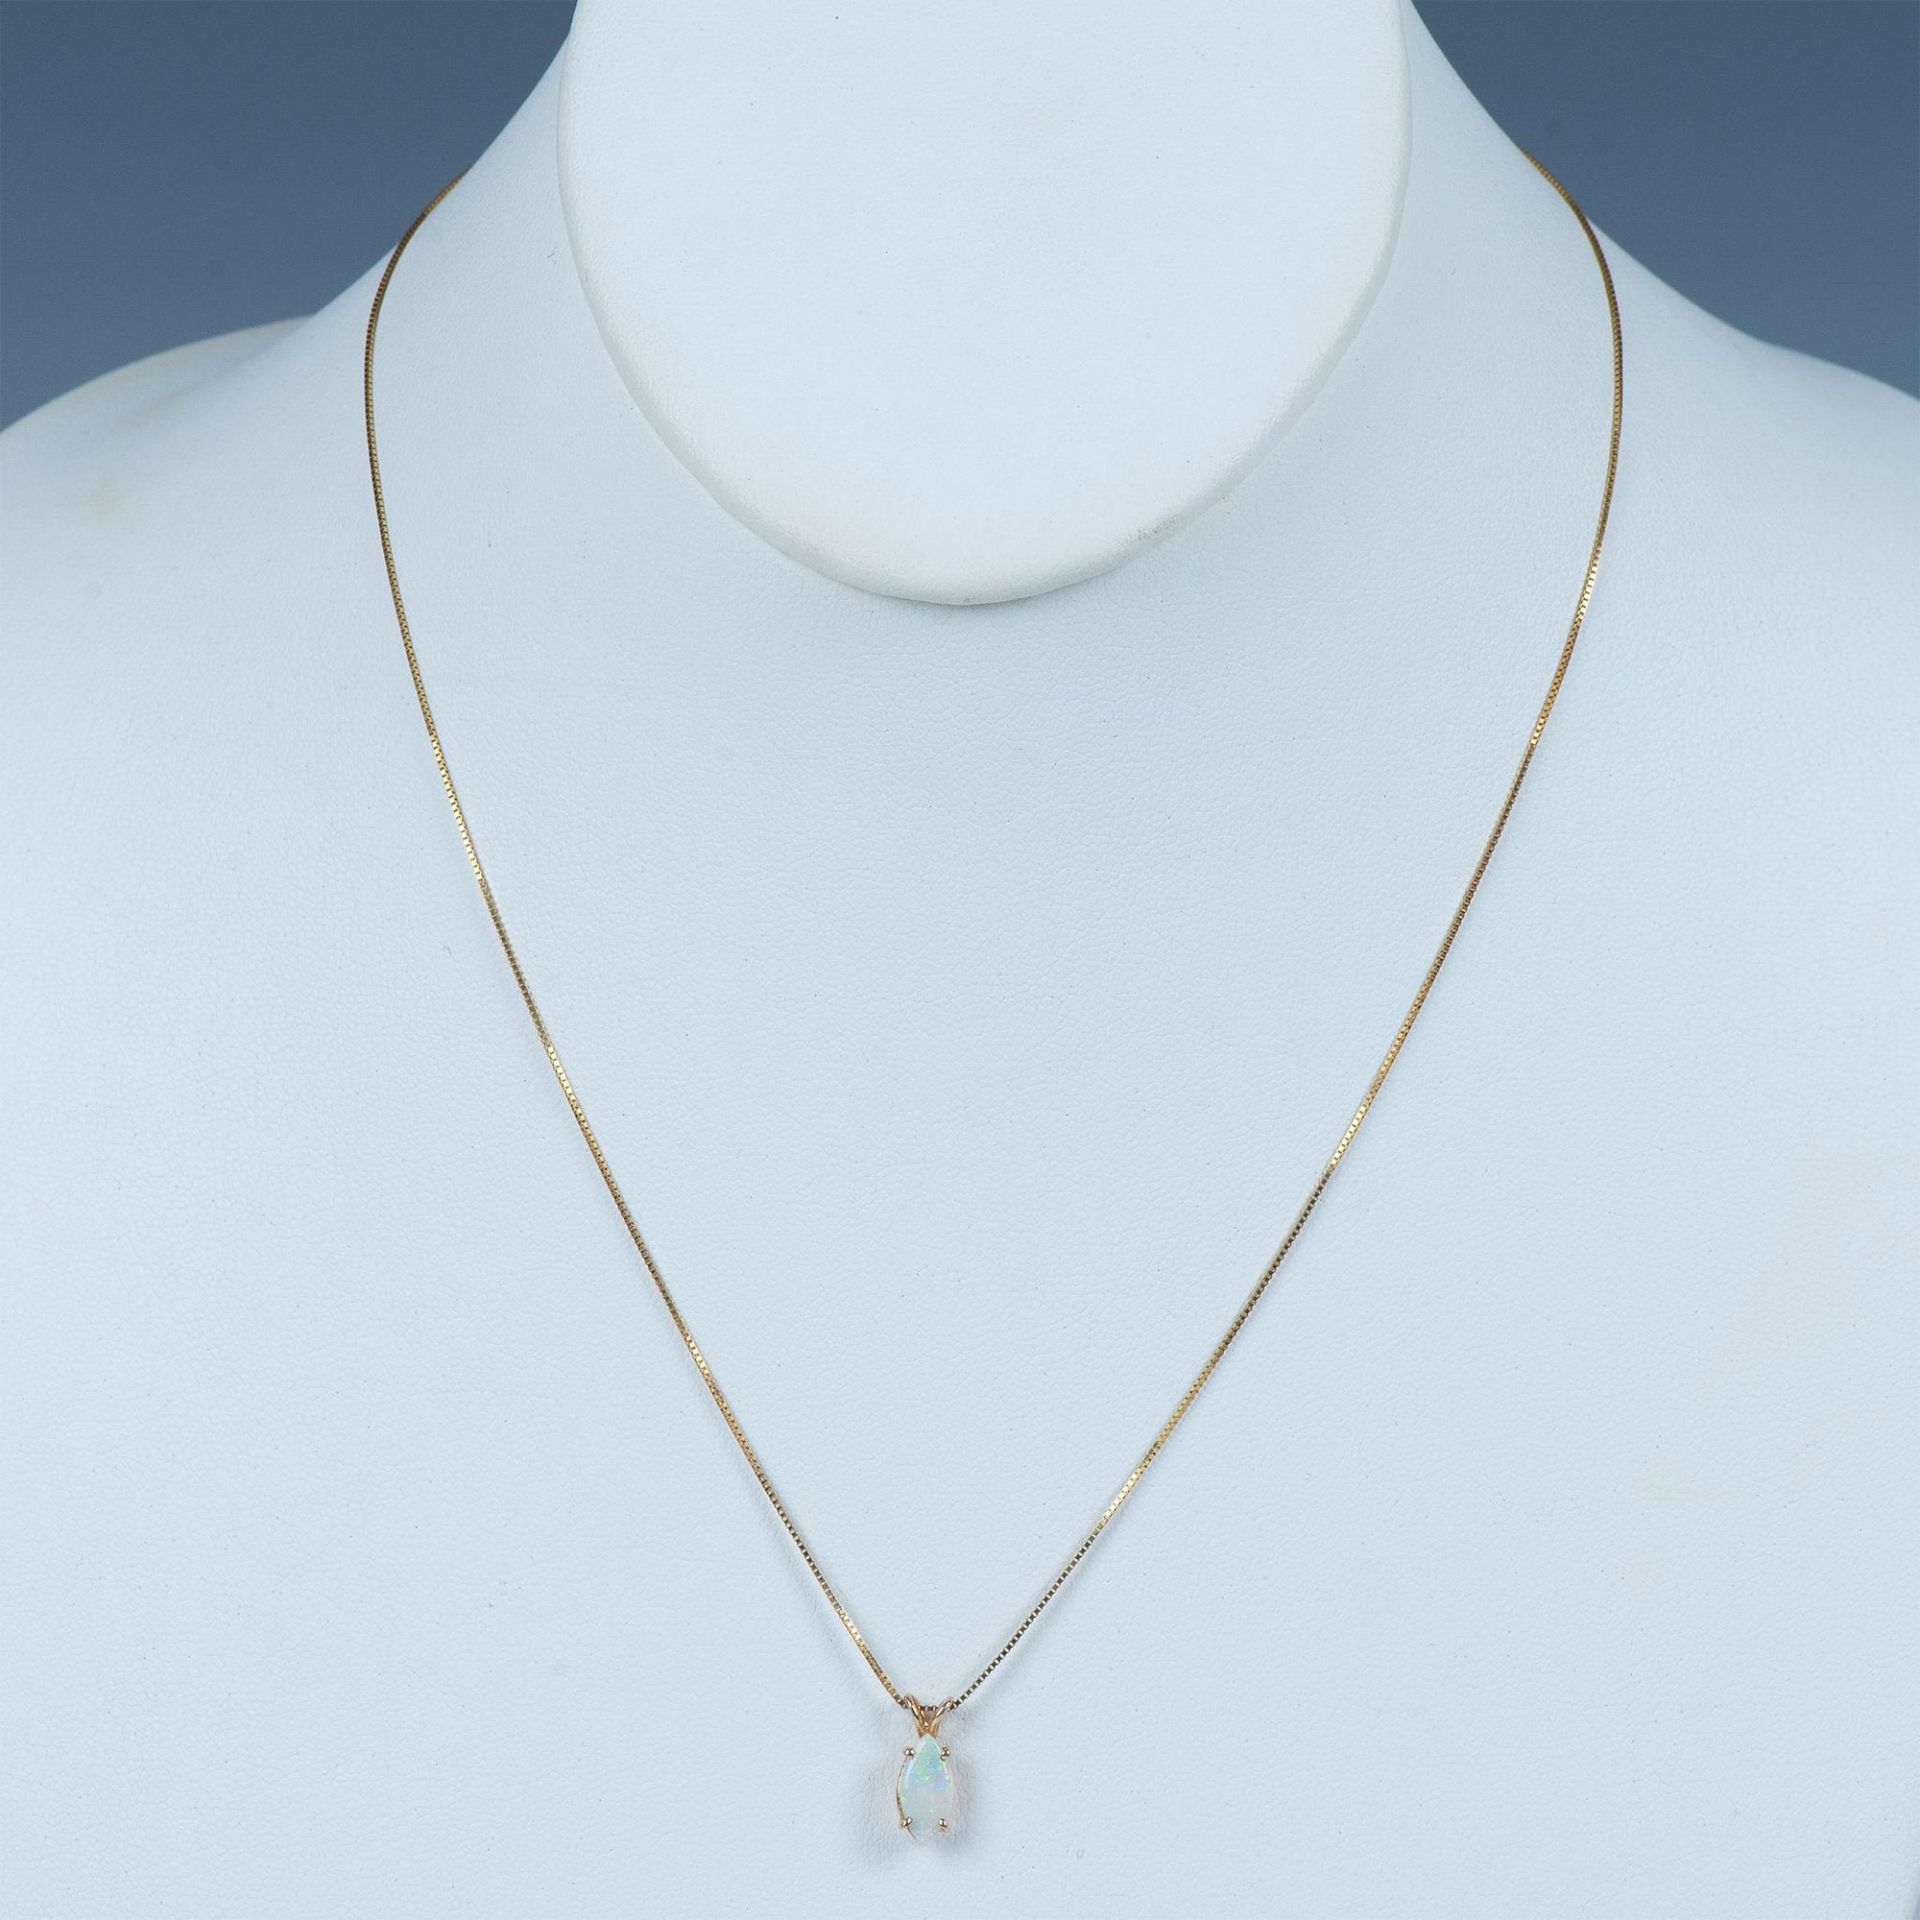 Delicate 14K Yellow Gold and Opal Necklace - Image 2 of 5